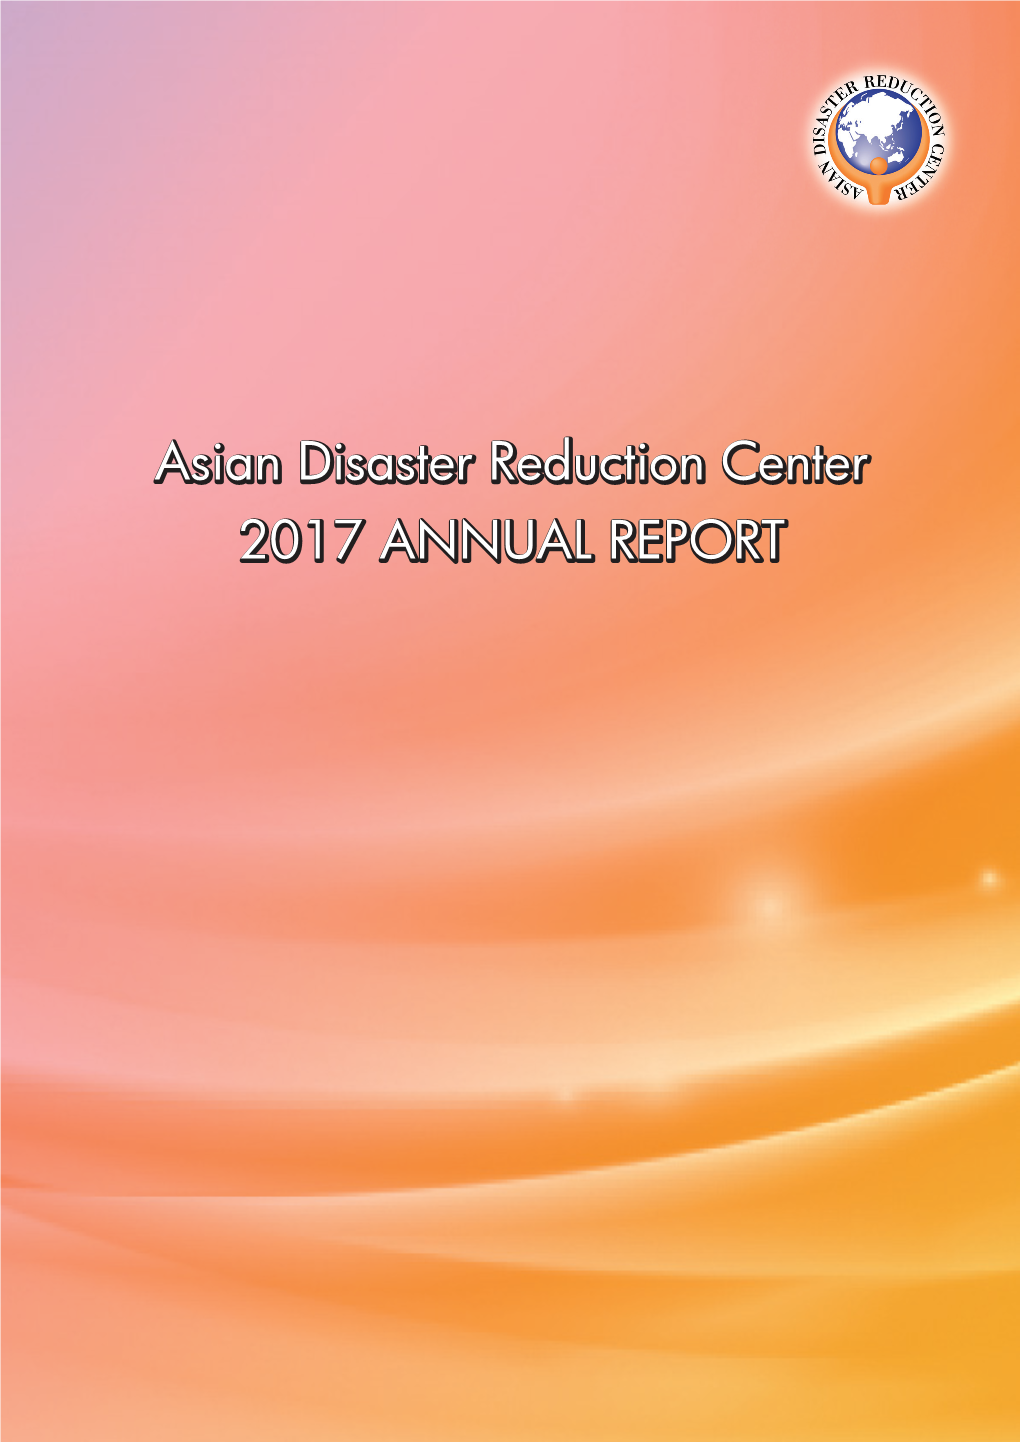 1. Asian Disaster Reduction Center